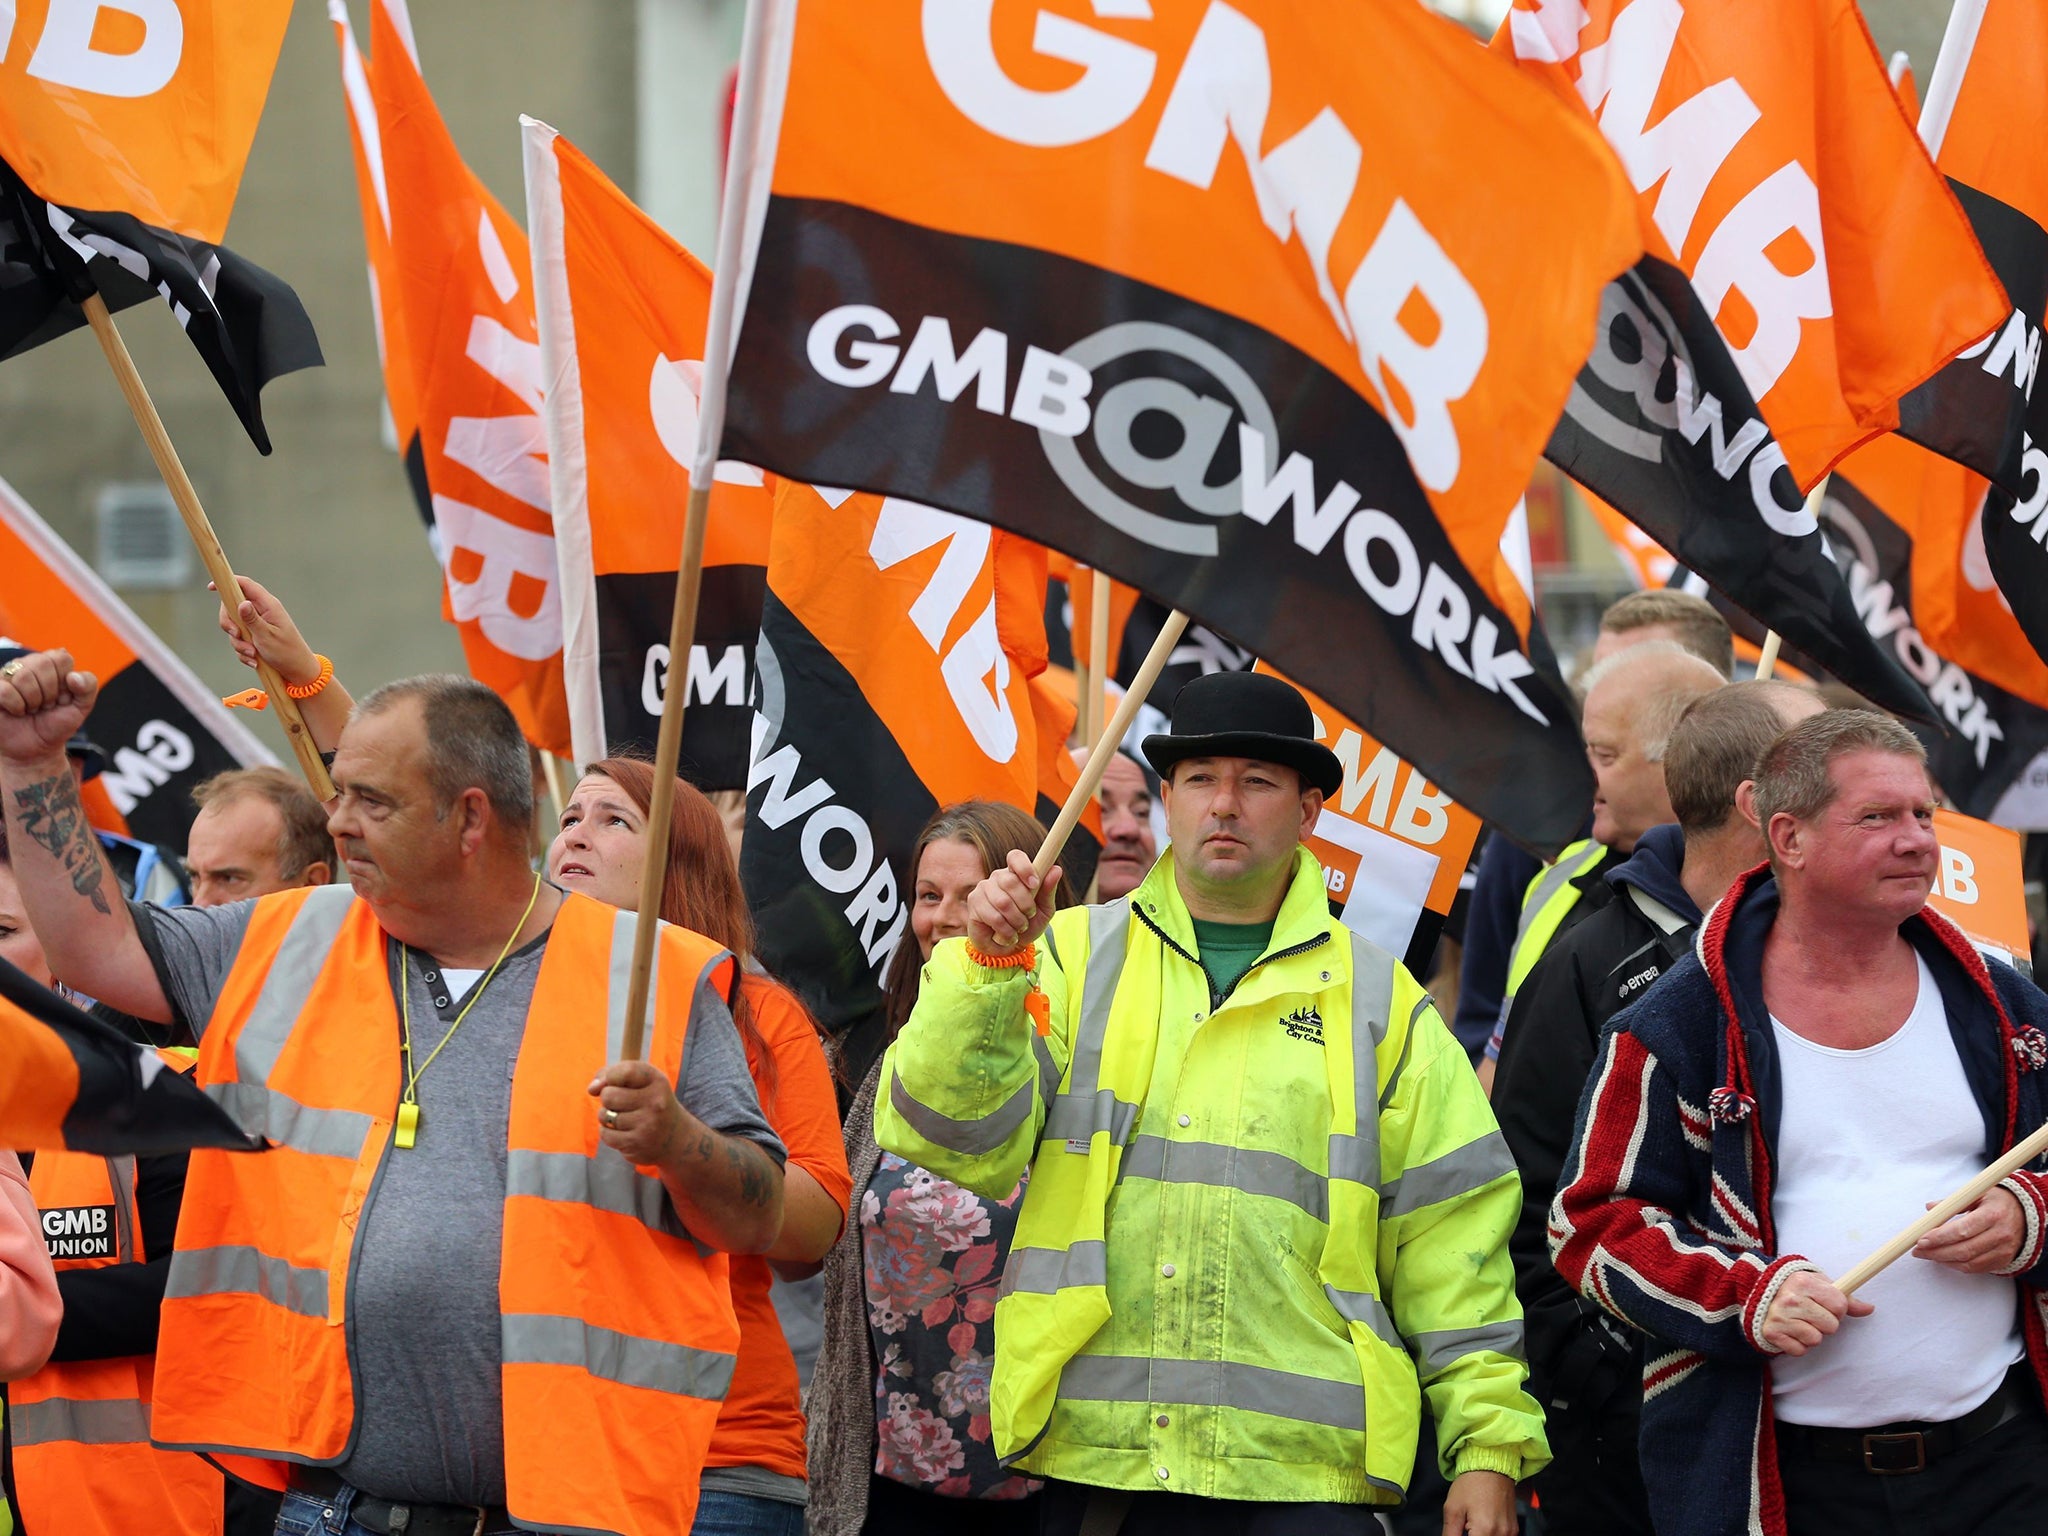 Public sector workers and members of the GMB union make their way through Brighton, as they take part in the one-day walkout as part of bitter disputes over pay, pensions, jobs and spending cuts